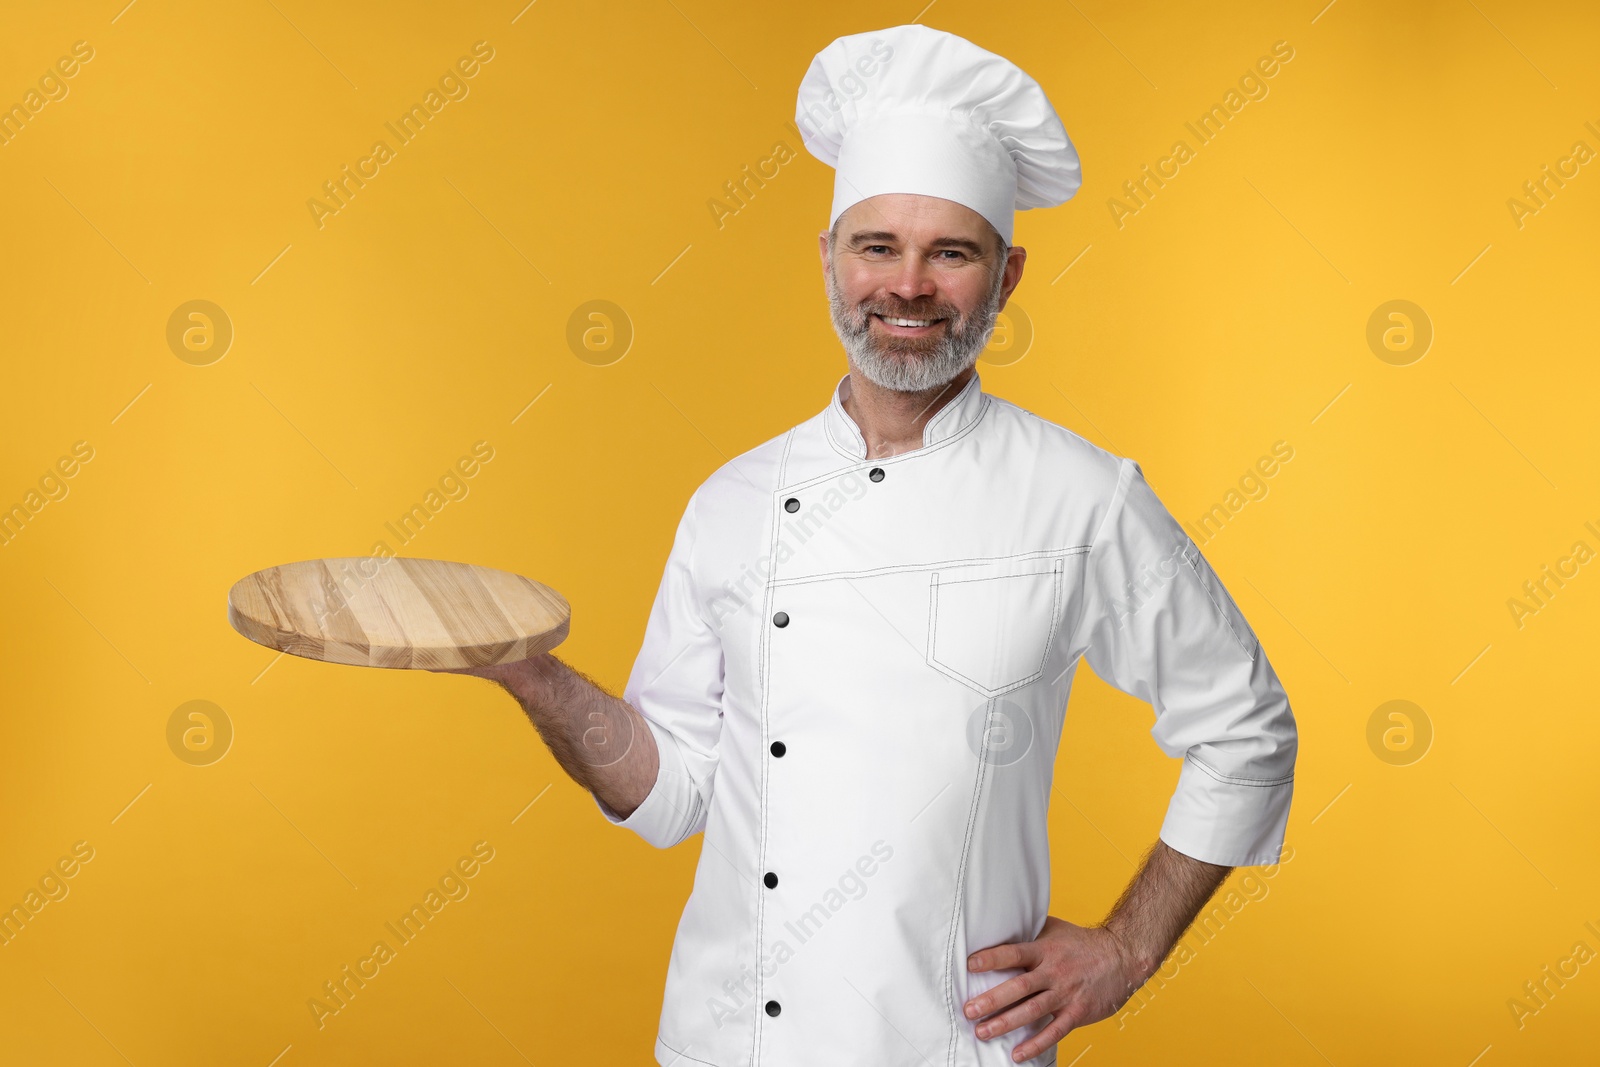 Photo of Happy chef in uniform with wooden board on orange background